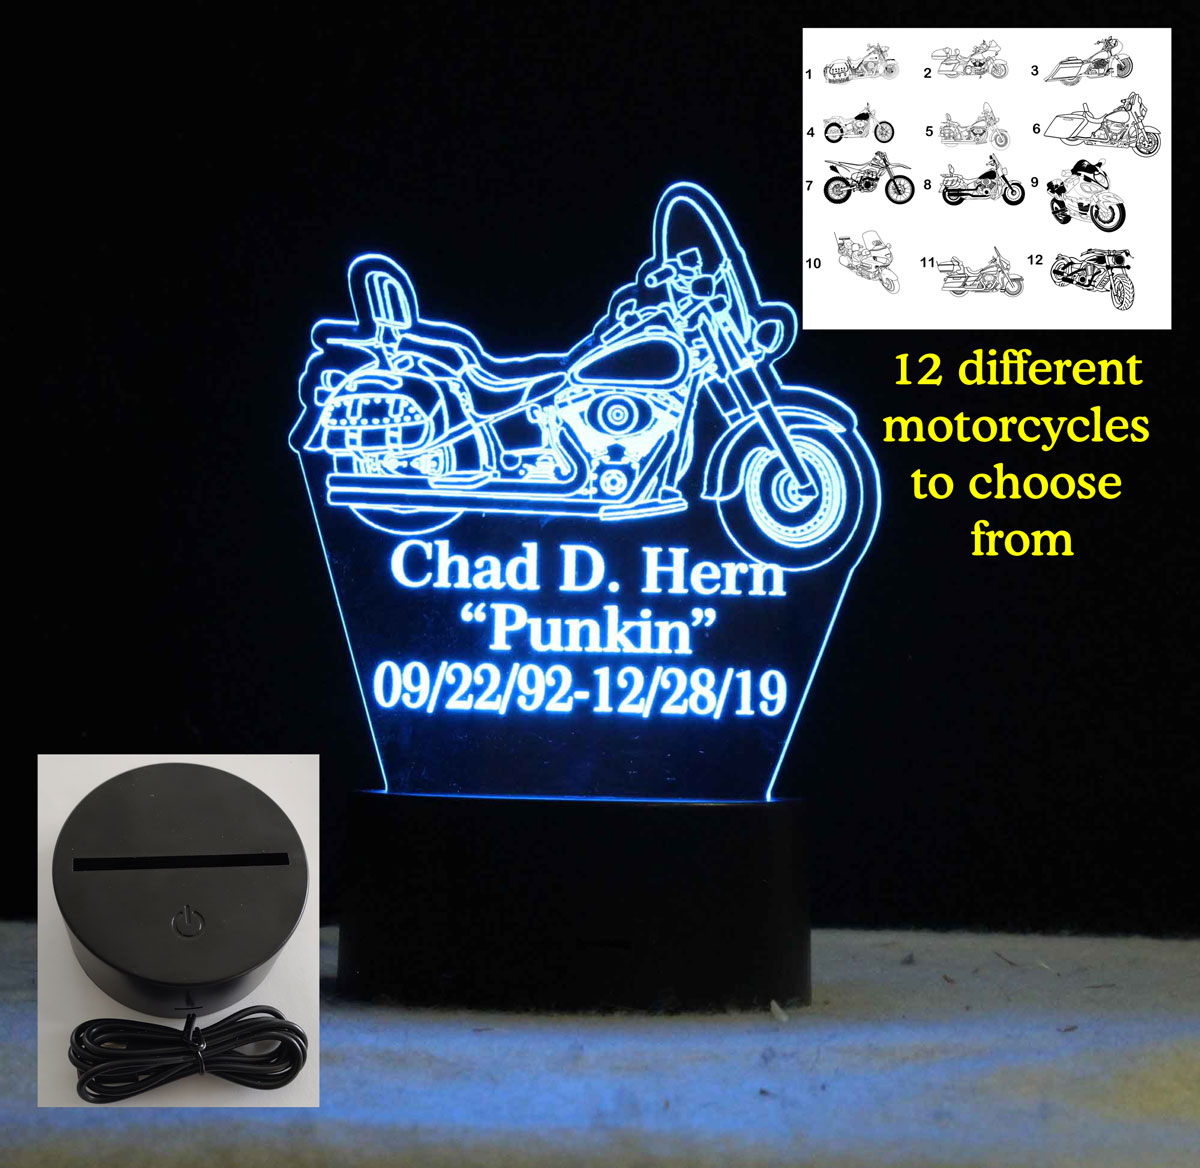 Personalized Motorcycle night light, Tabe top Memorial Plaque